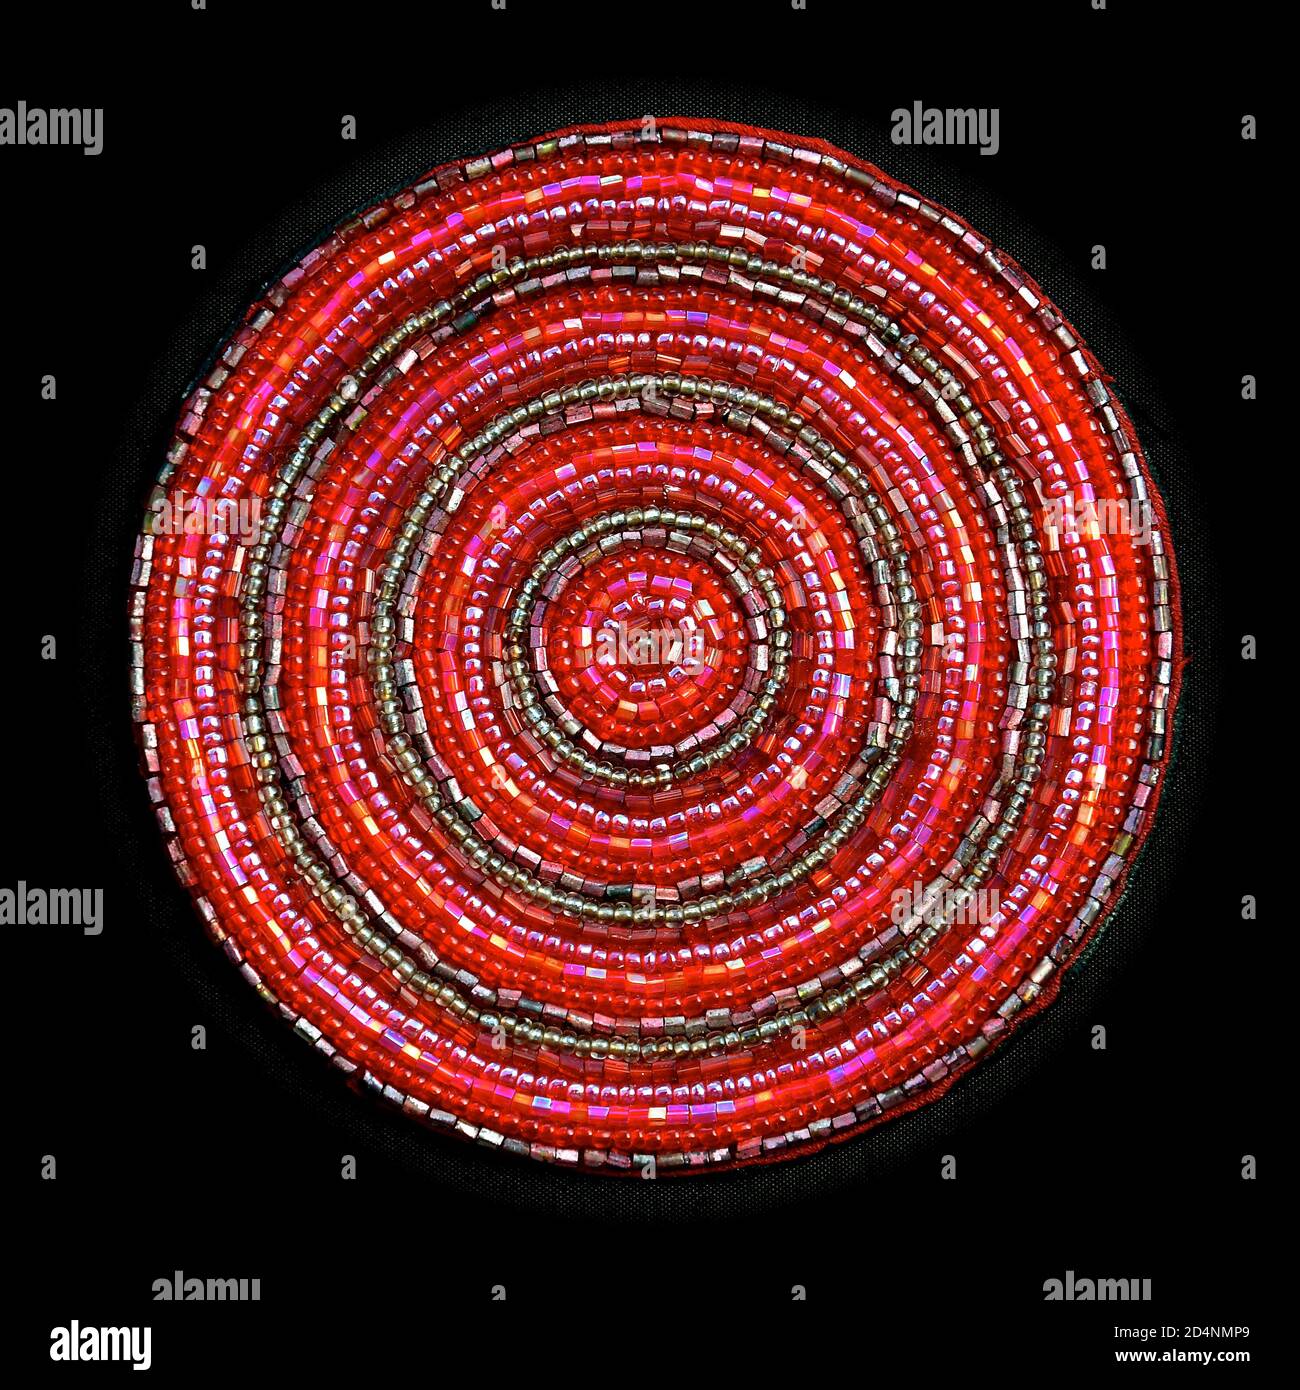 Macro image of a circular pink beaded coaster with small, glass iridescent beads sewn in concentric circles, isolated on a black background. Stock Photo